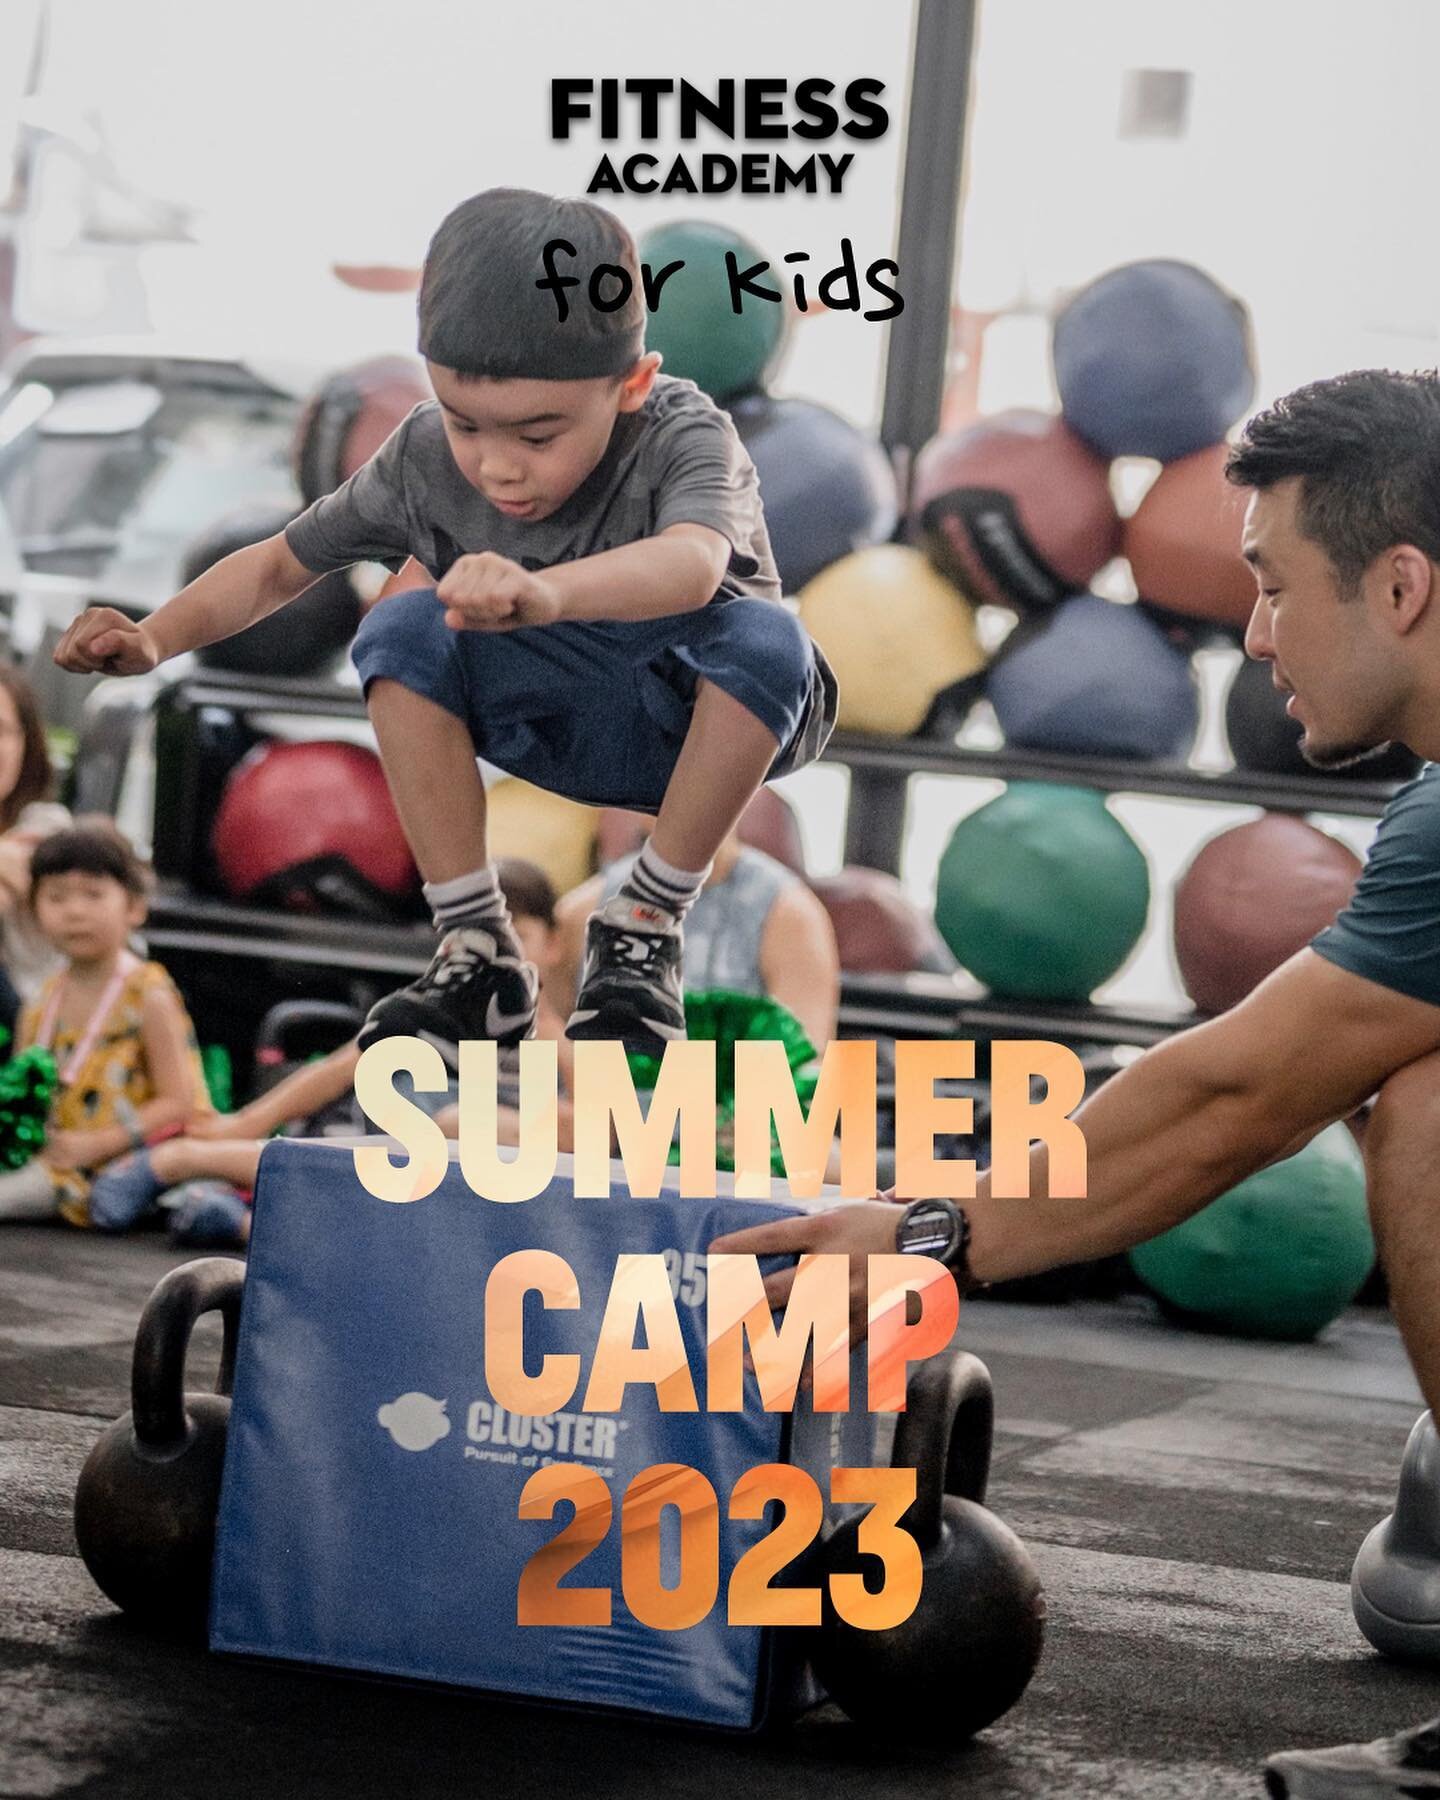 🎉☀️ Fitness Academy&lsquo;s most popular kids summer camp is back! ☀️ 🎉

Get ready for a summer filled with:
👉🏼 Variety of gymnastic, strength and conditioning training 💪
👉🏼 Improving total athletic foundation🏃&zwj;♂️ 
👉🏼 Fun focused activi